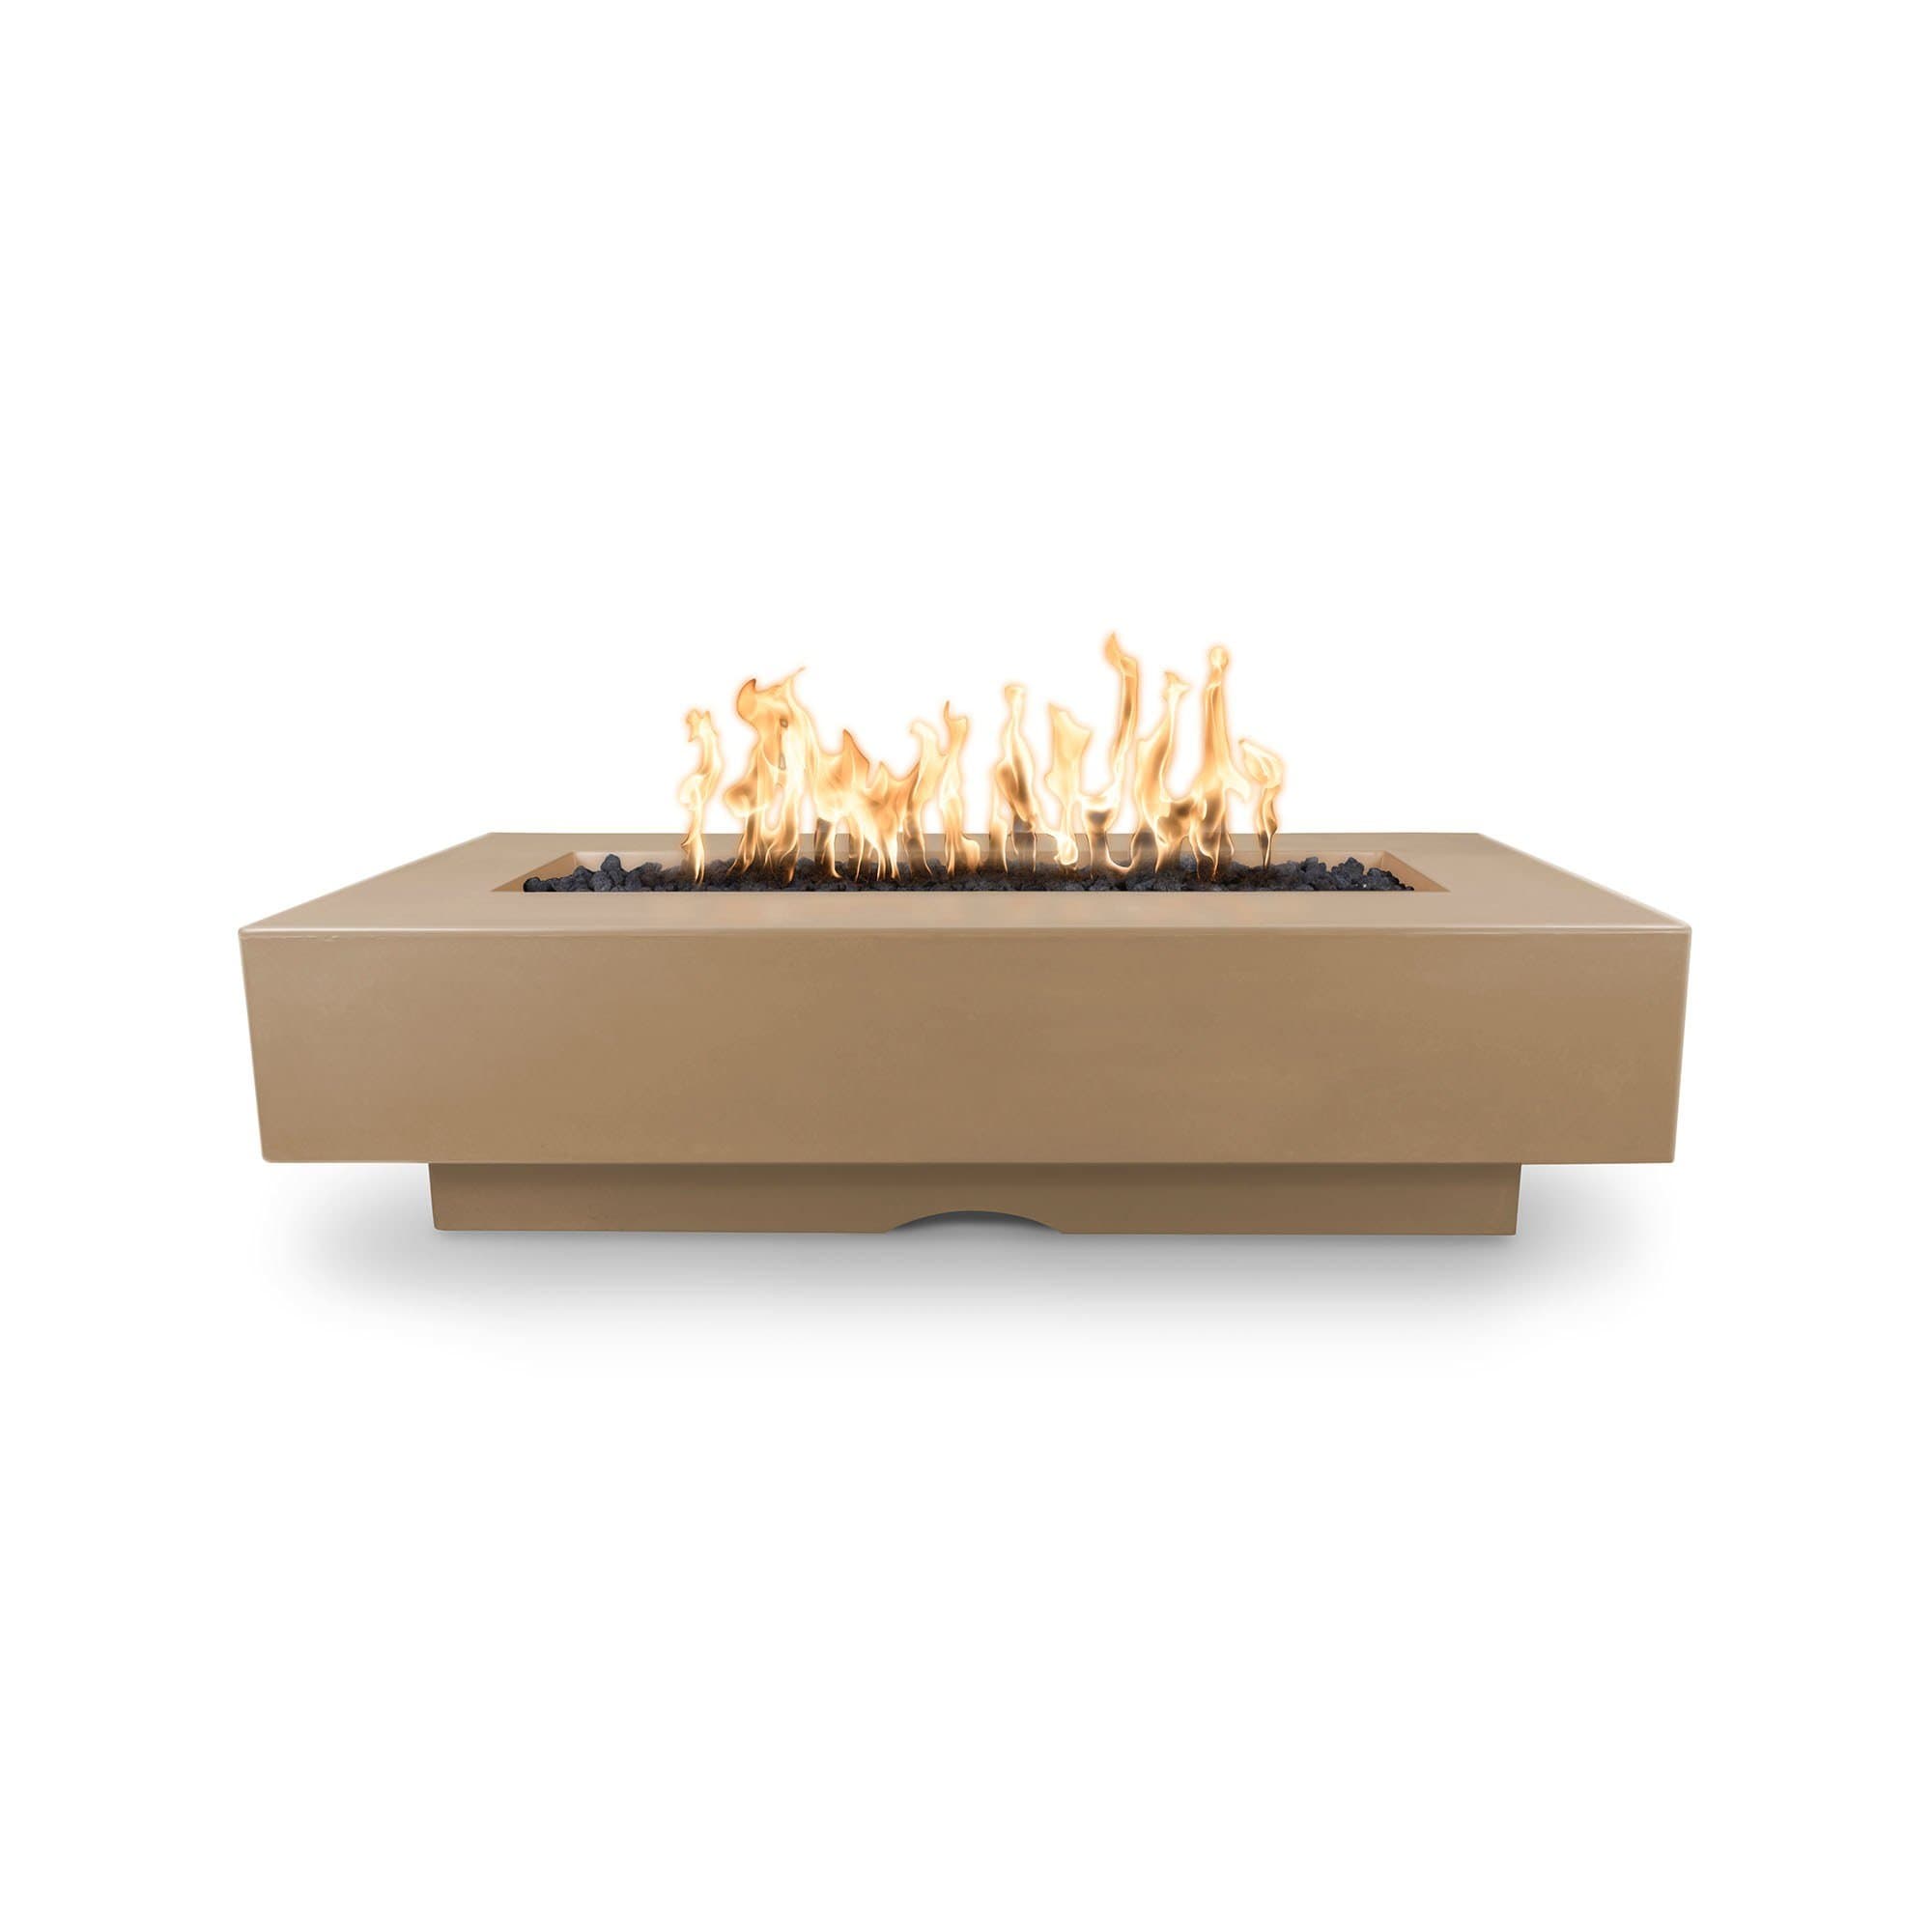 The Outdoor Plus Del Mar Concrete Fire Pit in color brown with flame on a white background